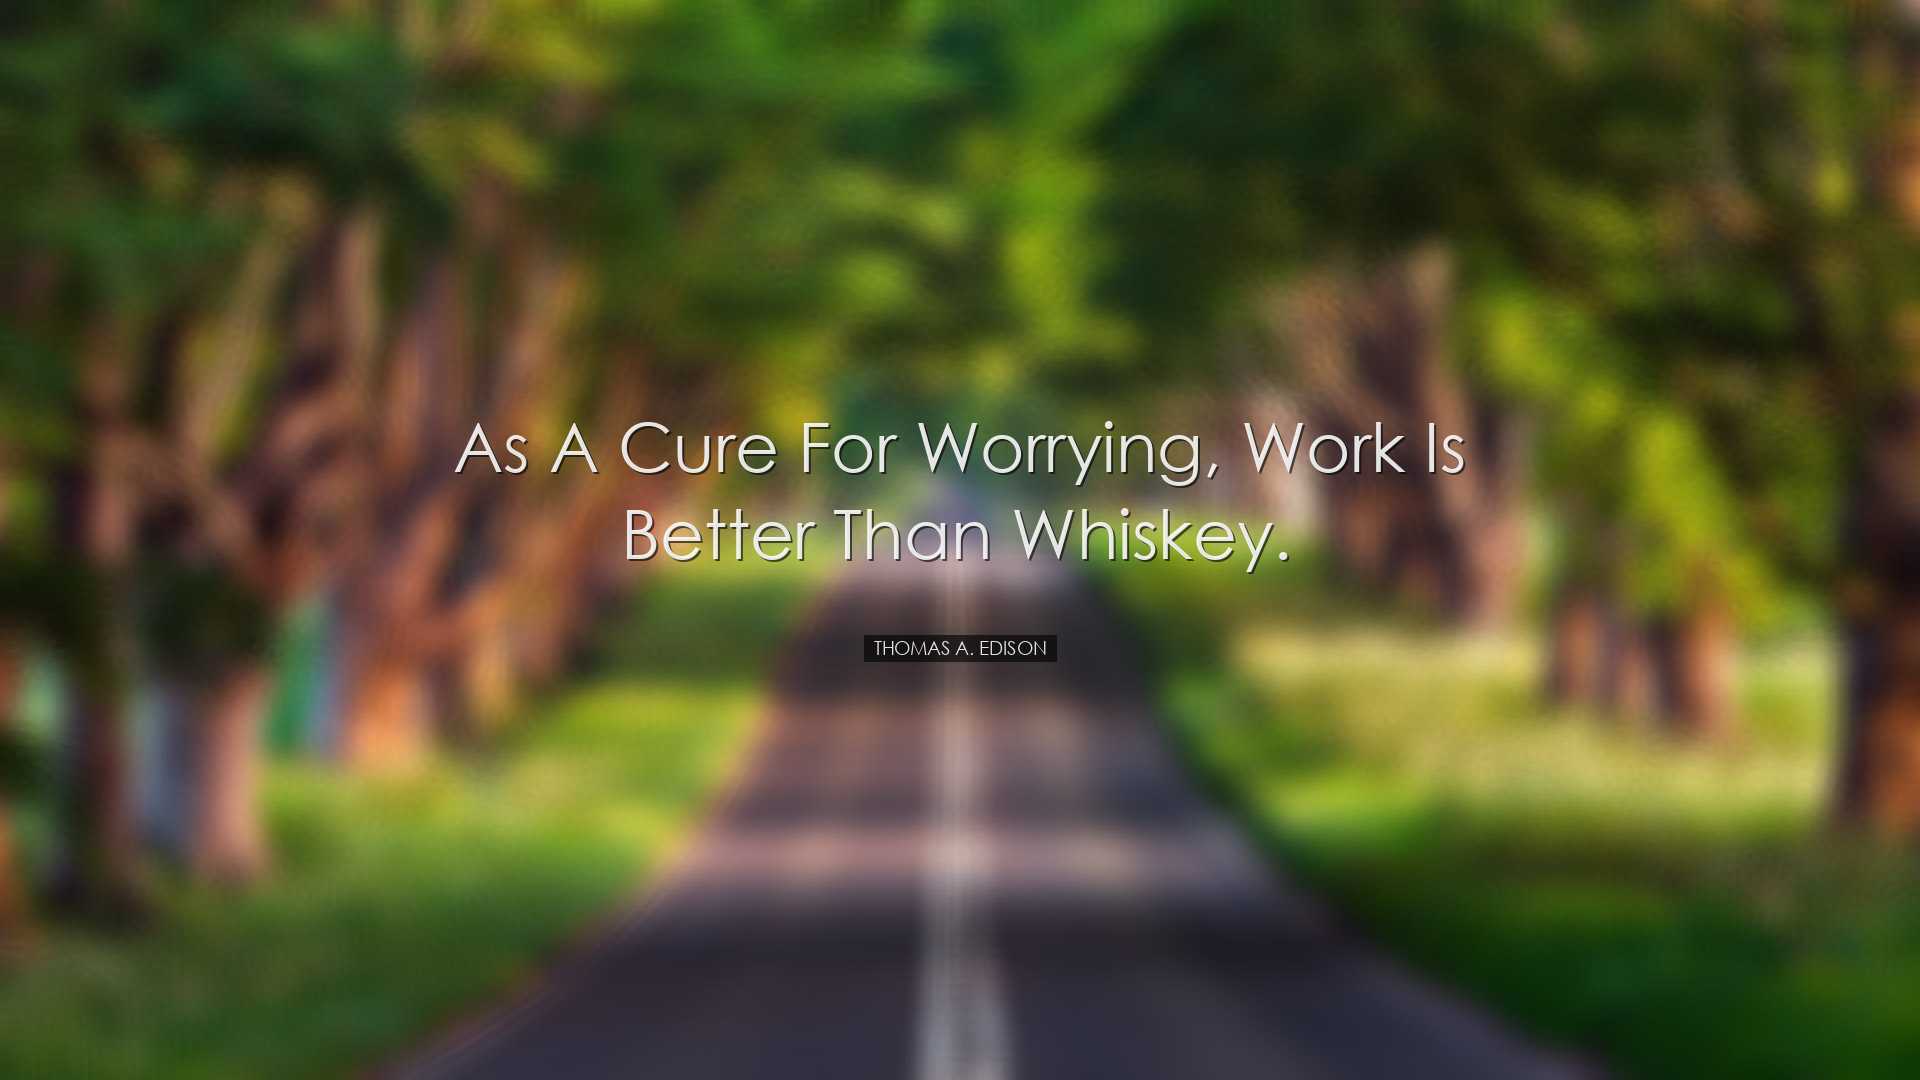 As a cure for worrying, work is better than whiskey. - Thomas A. E